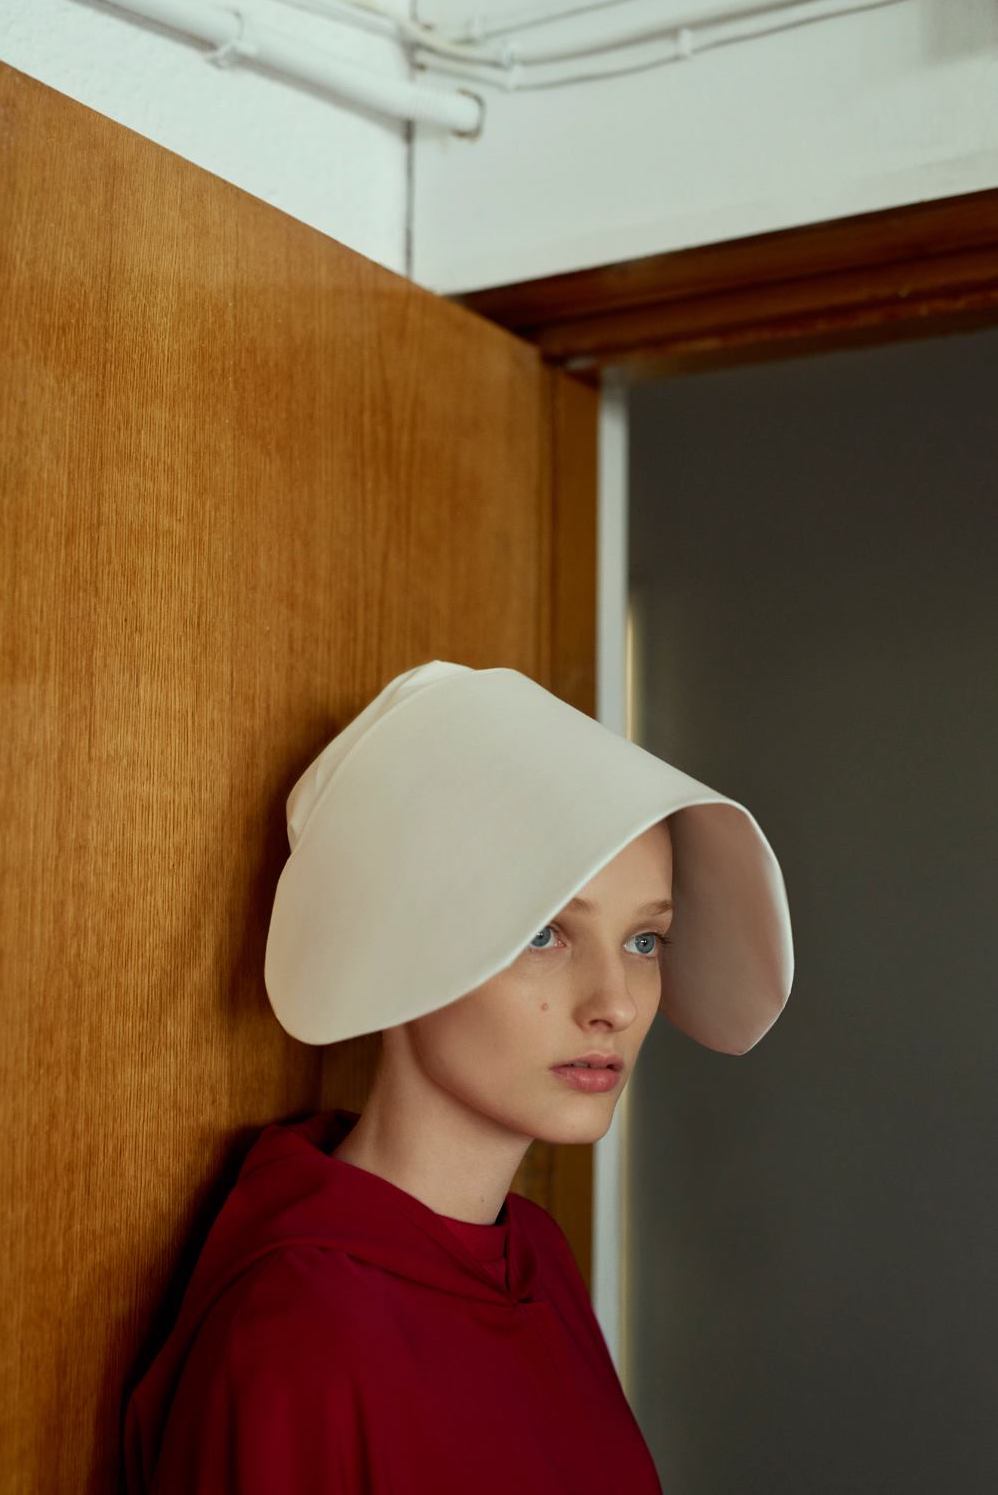 EDITORIAL: Showmax x The Handmaid's Tale WITH COSTUMES BY KAS KRYST